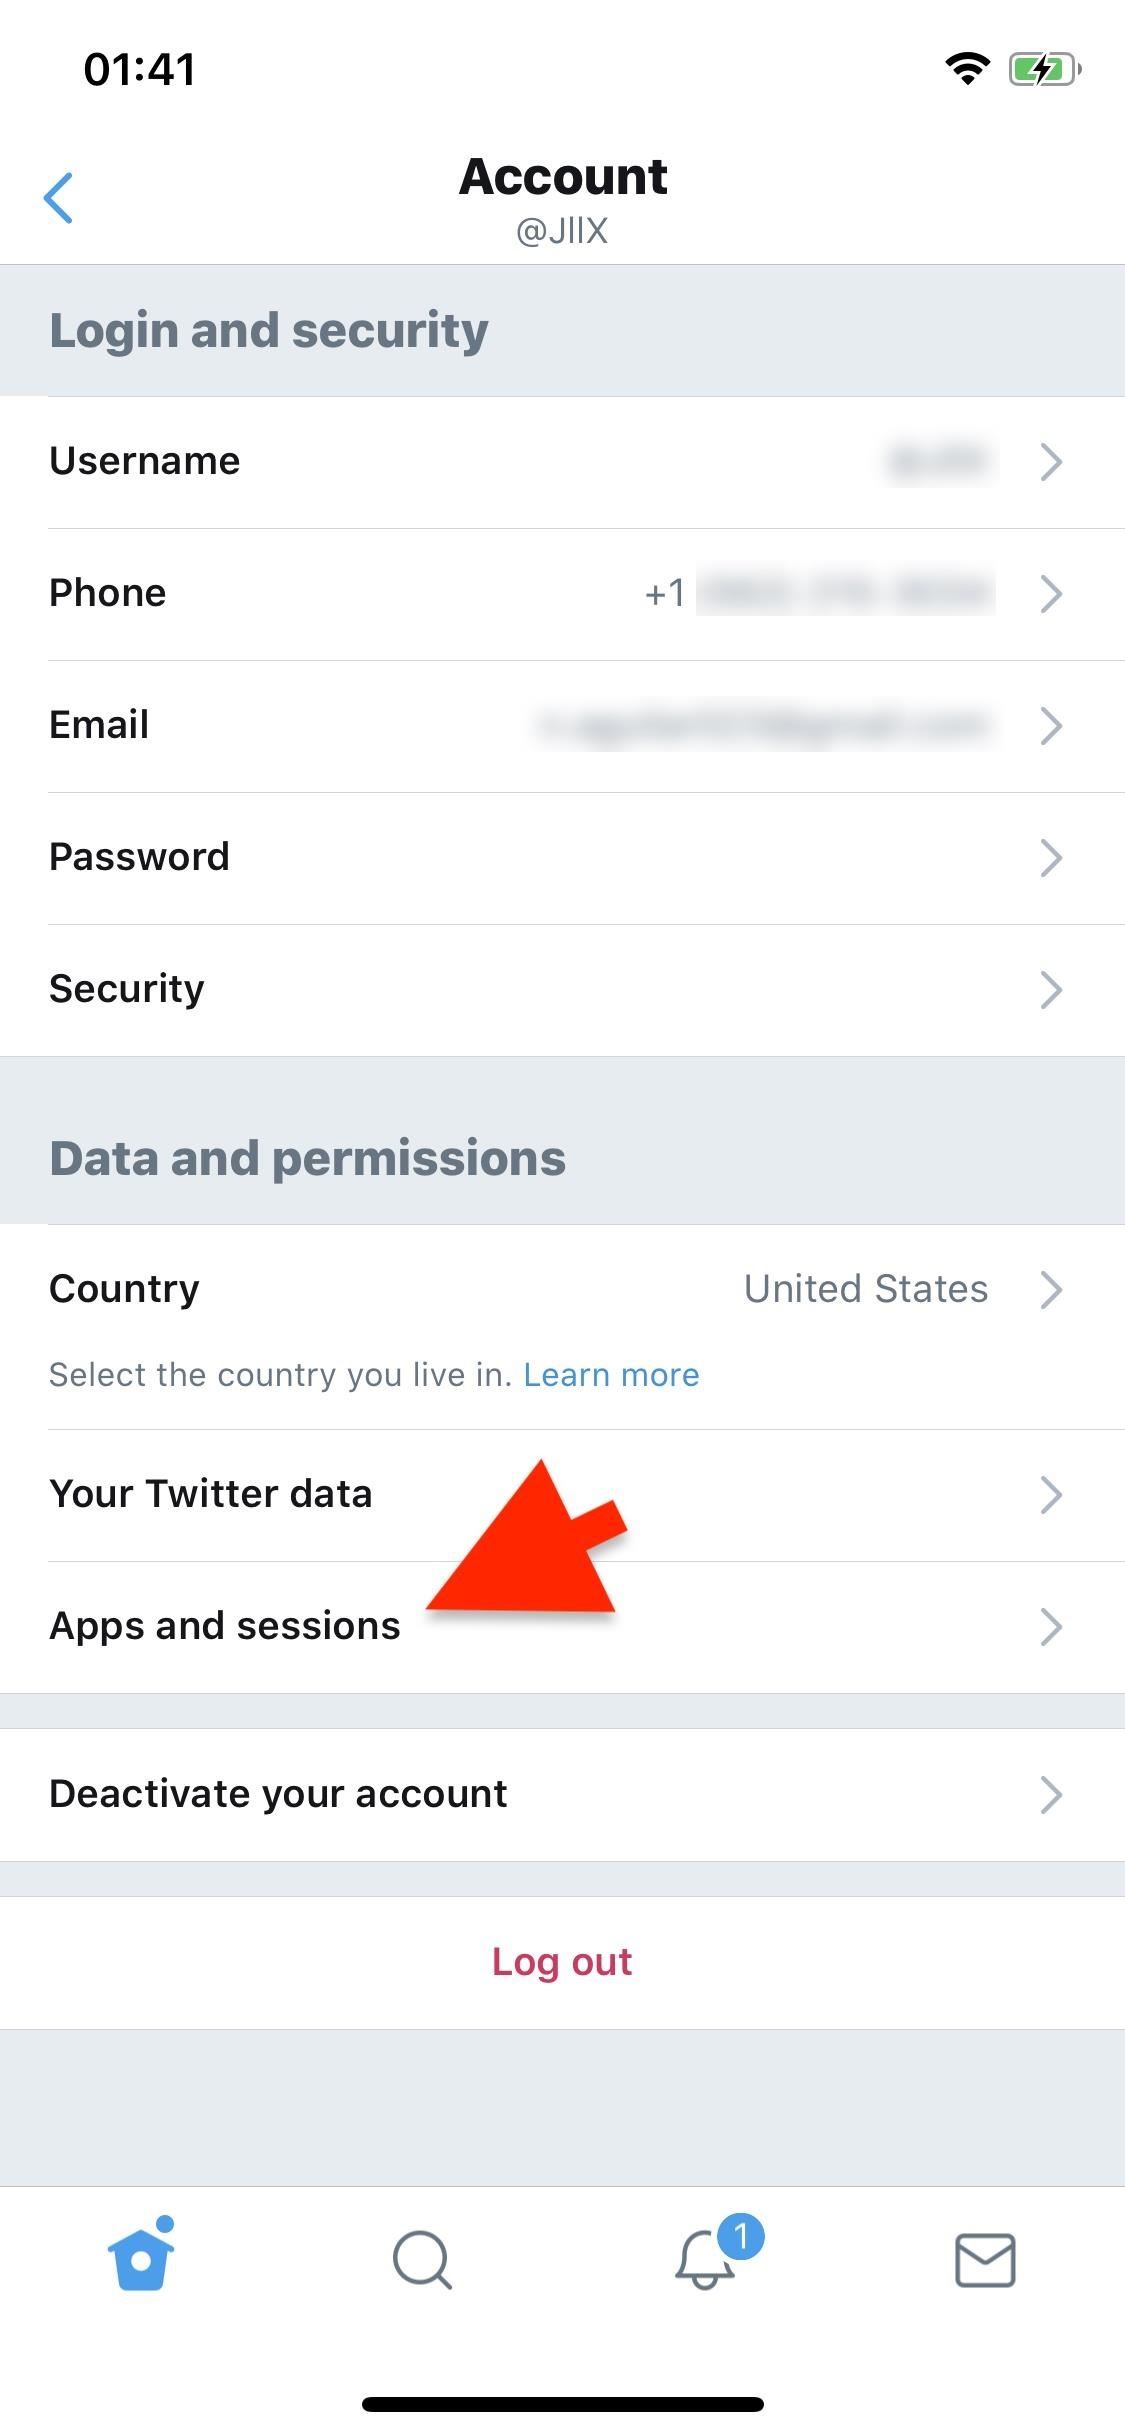 7 Tips to Improve Your Privacy & Safety on Twitter